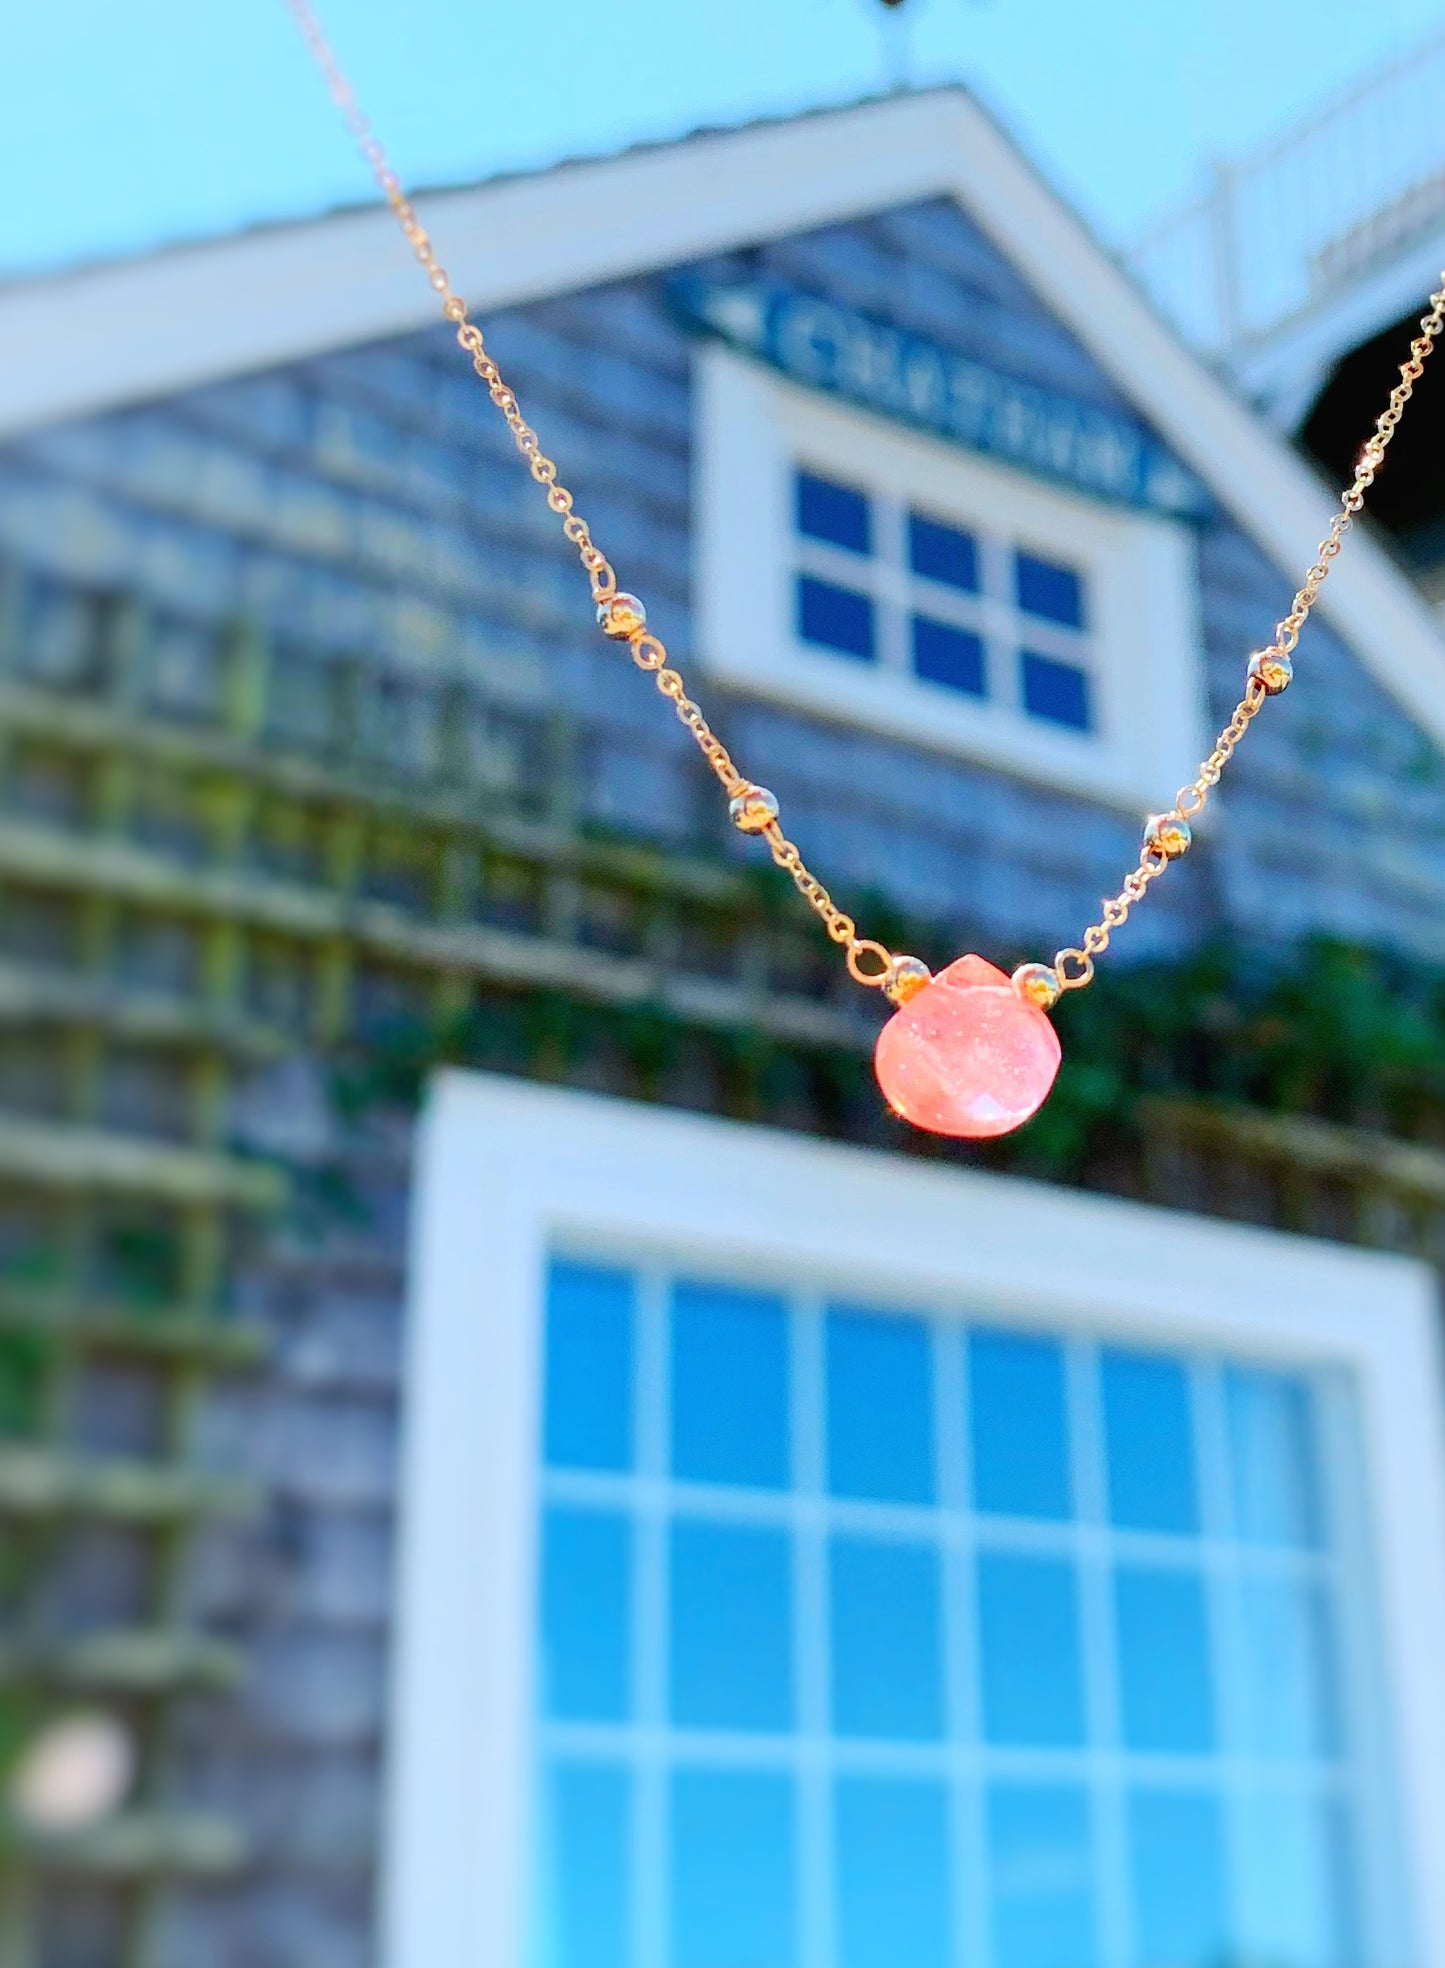 Chatham Necklace by Mermaids and Madeleines features a cherry quartz briolette drop and 14k gold filled findings, beads and chain. This one is pictured in the air with a blurred shingled beach cottage in the background